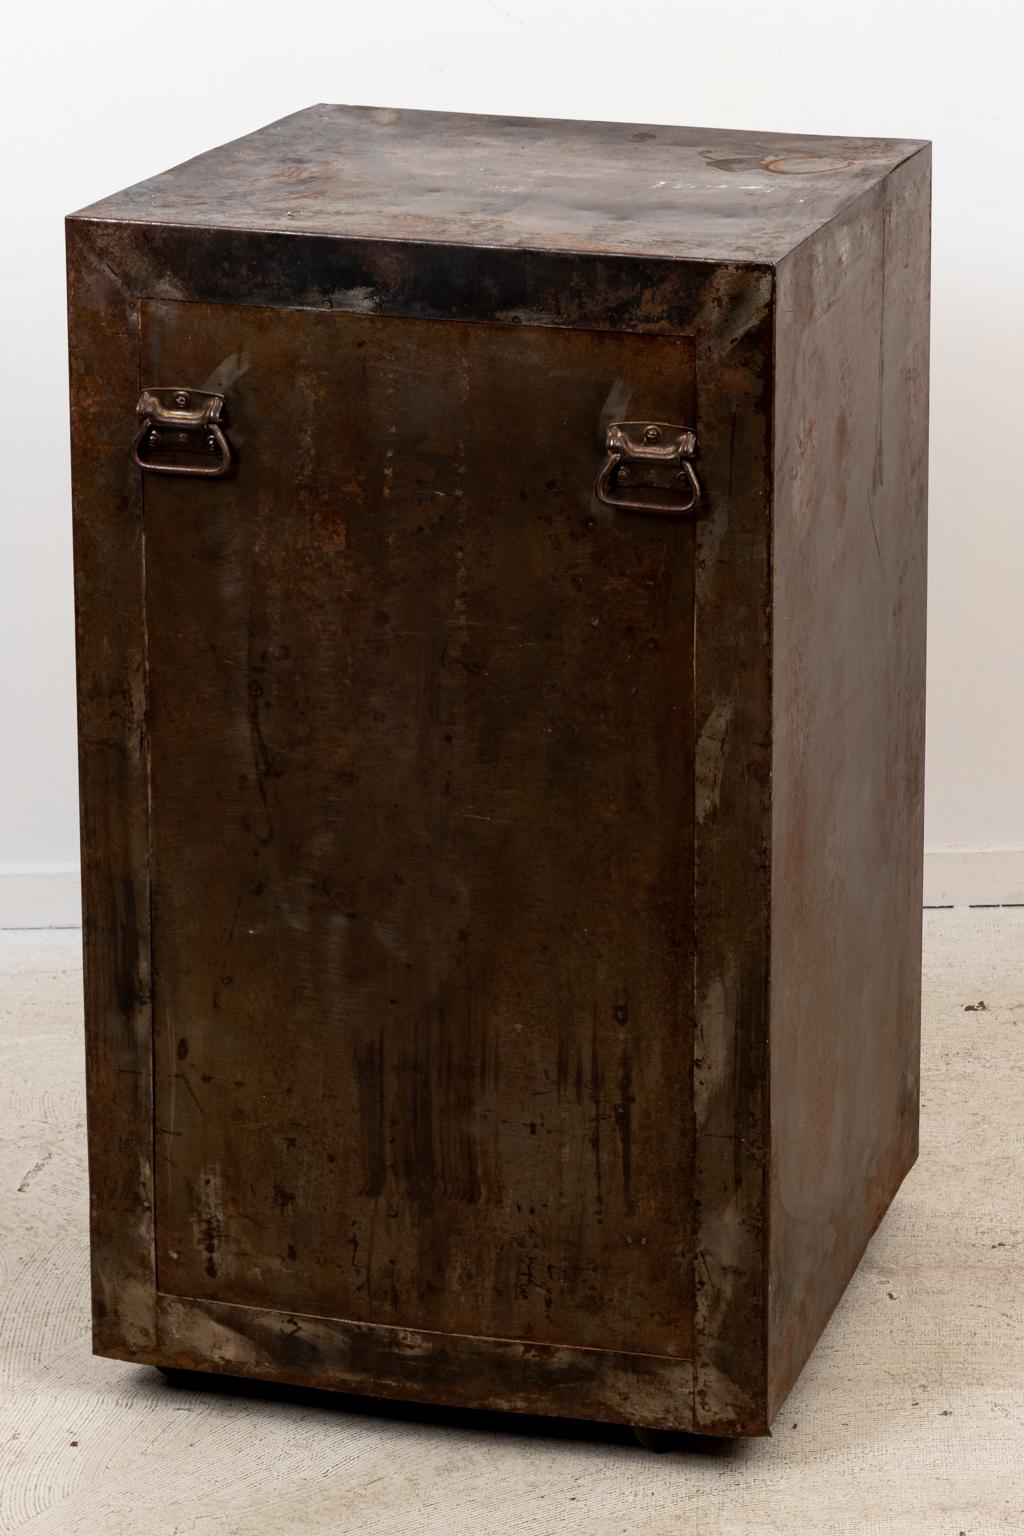 Circa 1900s antique steel file cabinet with twelve drawers. Please note of wear consistent with age including minor patina and oxidation.